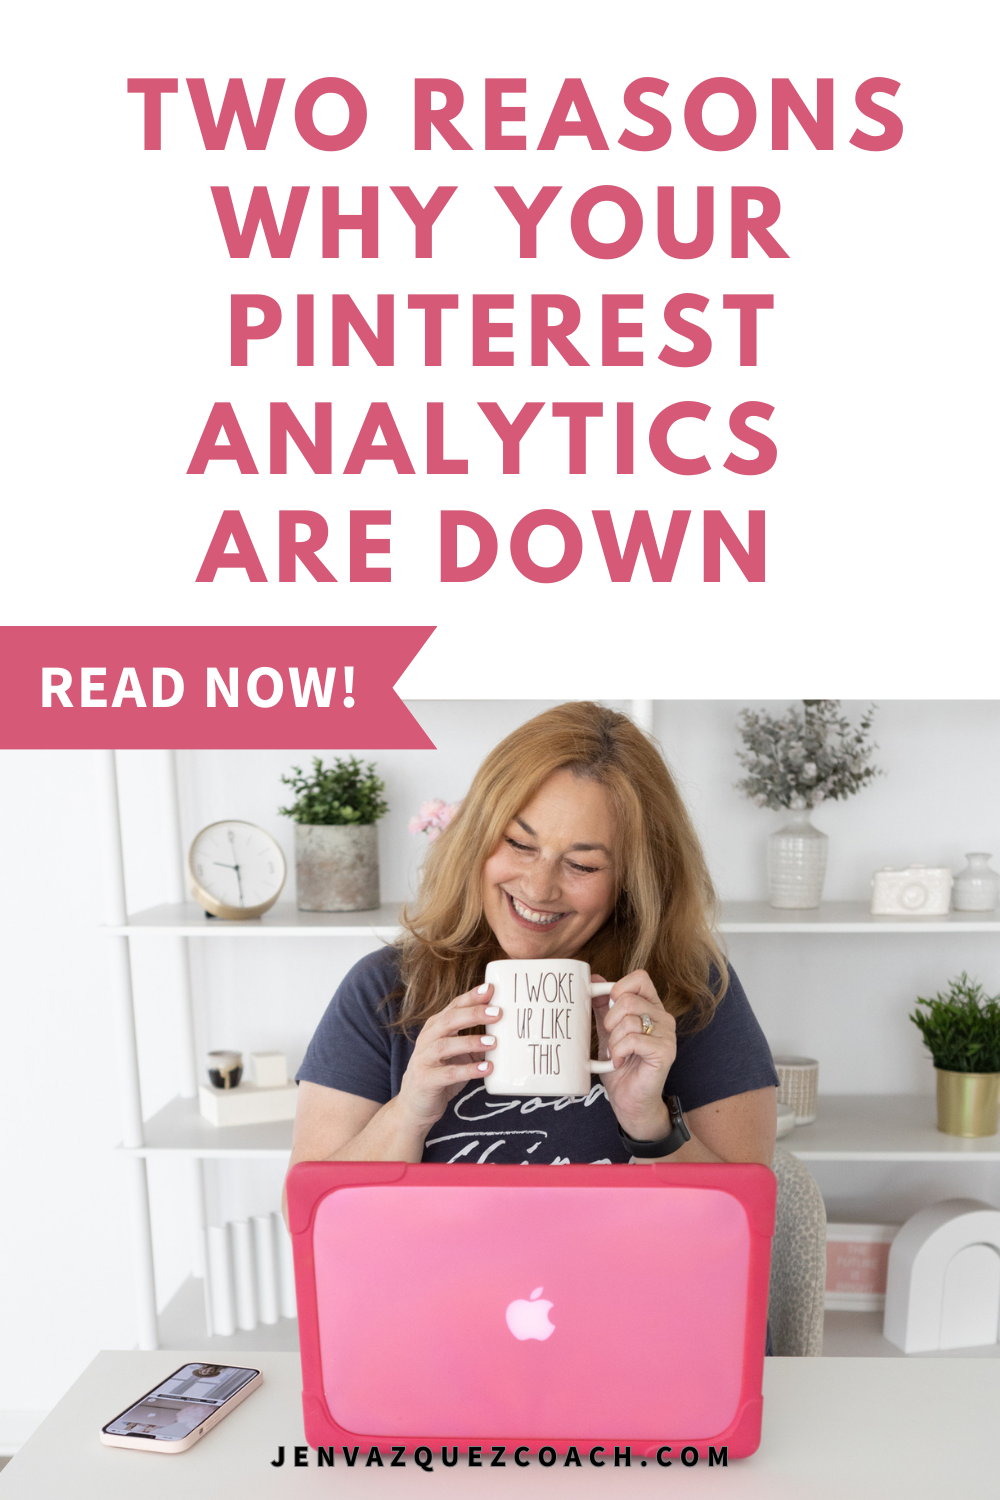 What the heck is going on with Pinterest Analytics by Jen Vazquez Media